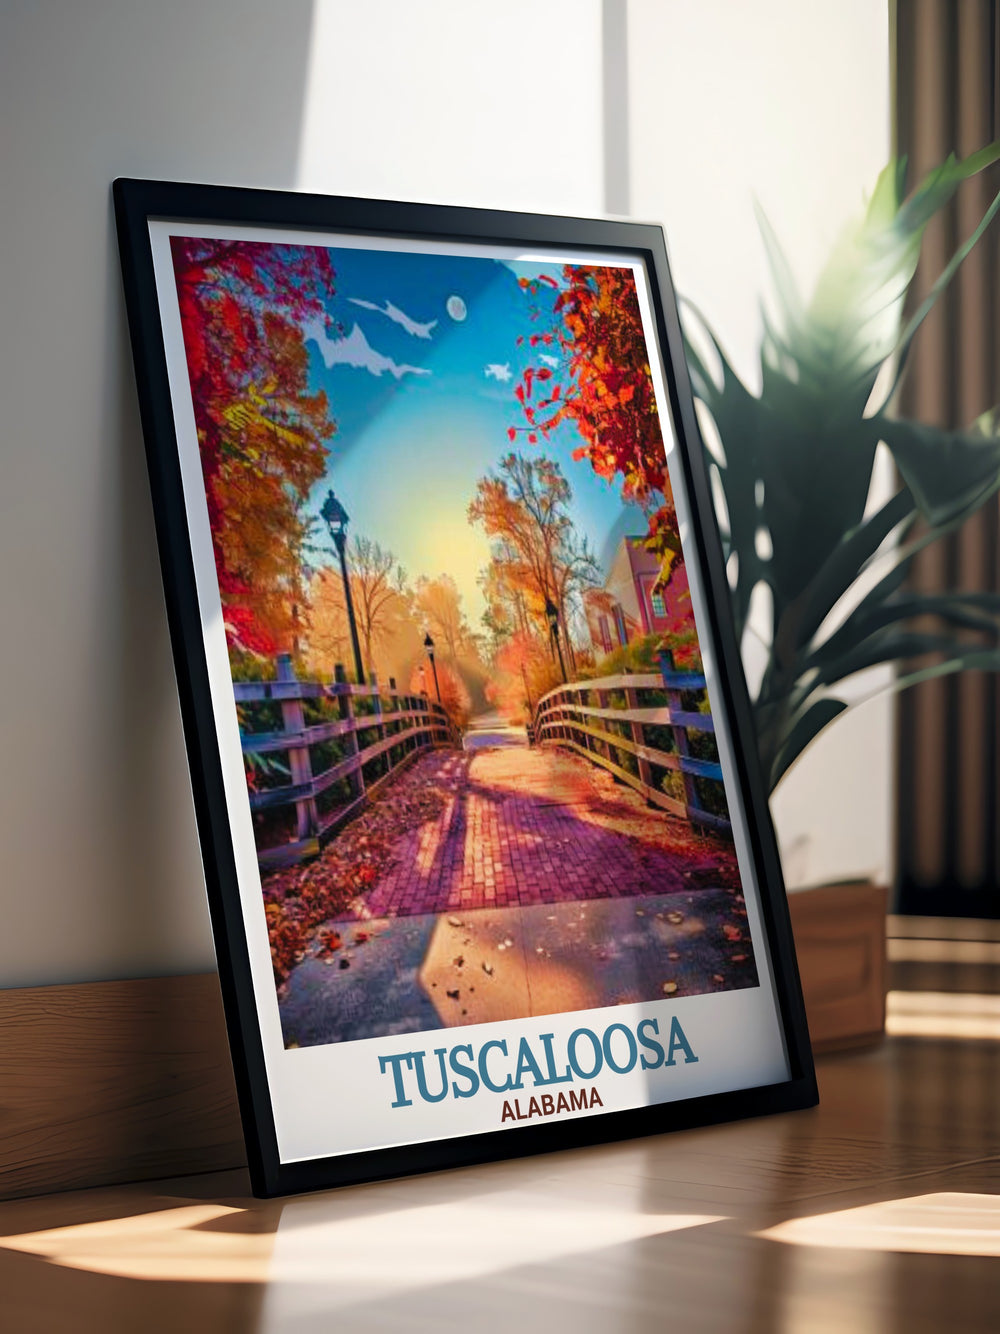 Tuscaloosa Alabama poster showcasing the beautiful Tuscaloosa Riverwalk and city map ideal for enhancing your home with elegant Tuscaloosa decor and stunning cityscape artwork making a perfect gift for fans and residents of this dynamic city